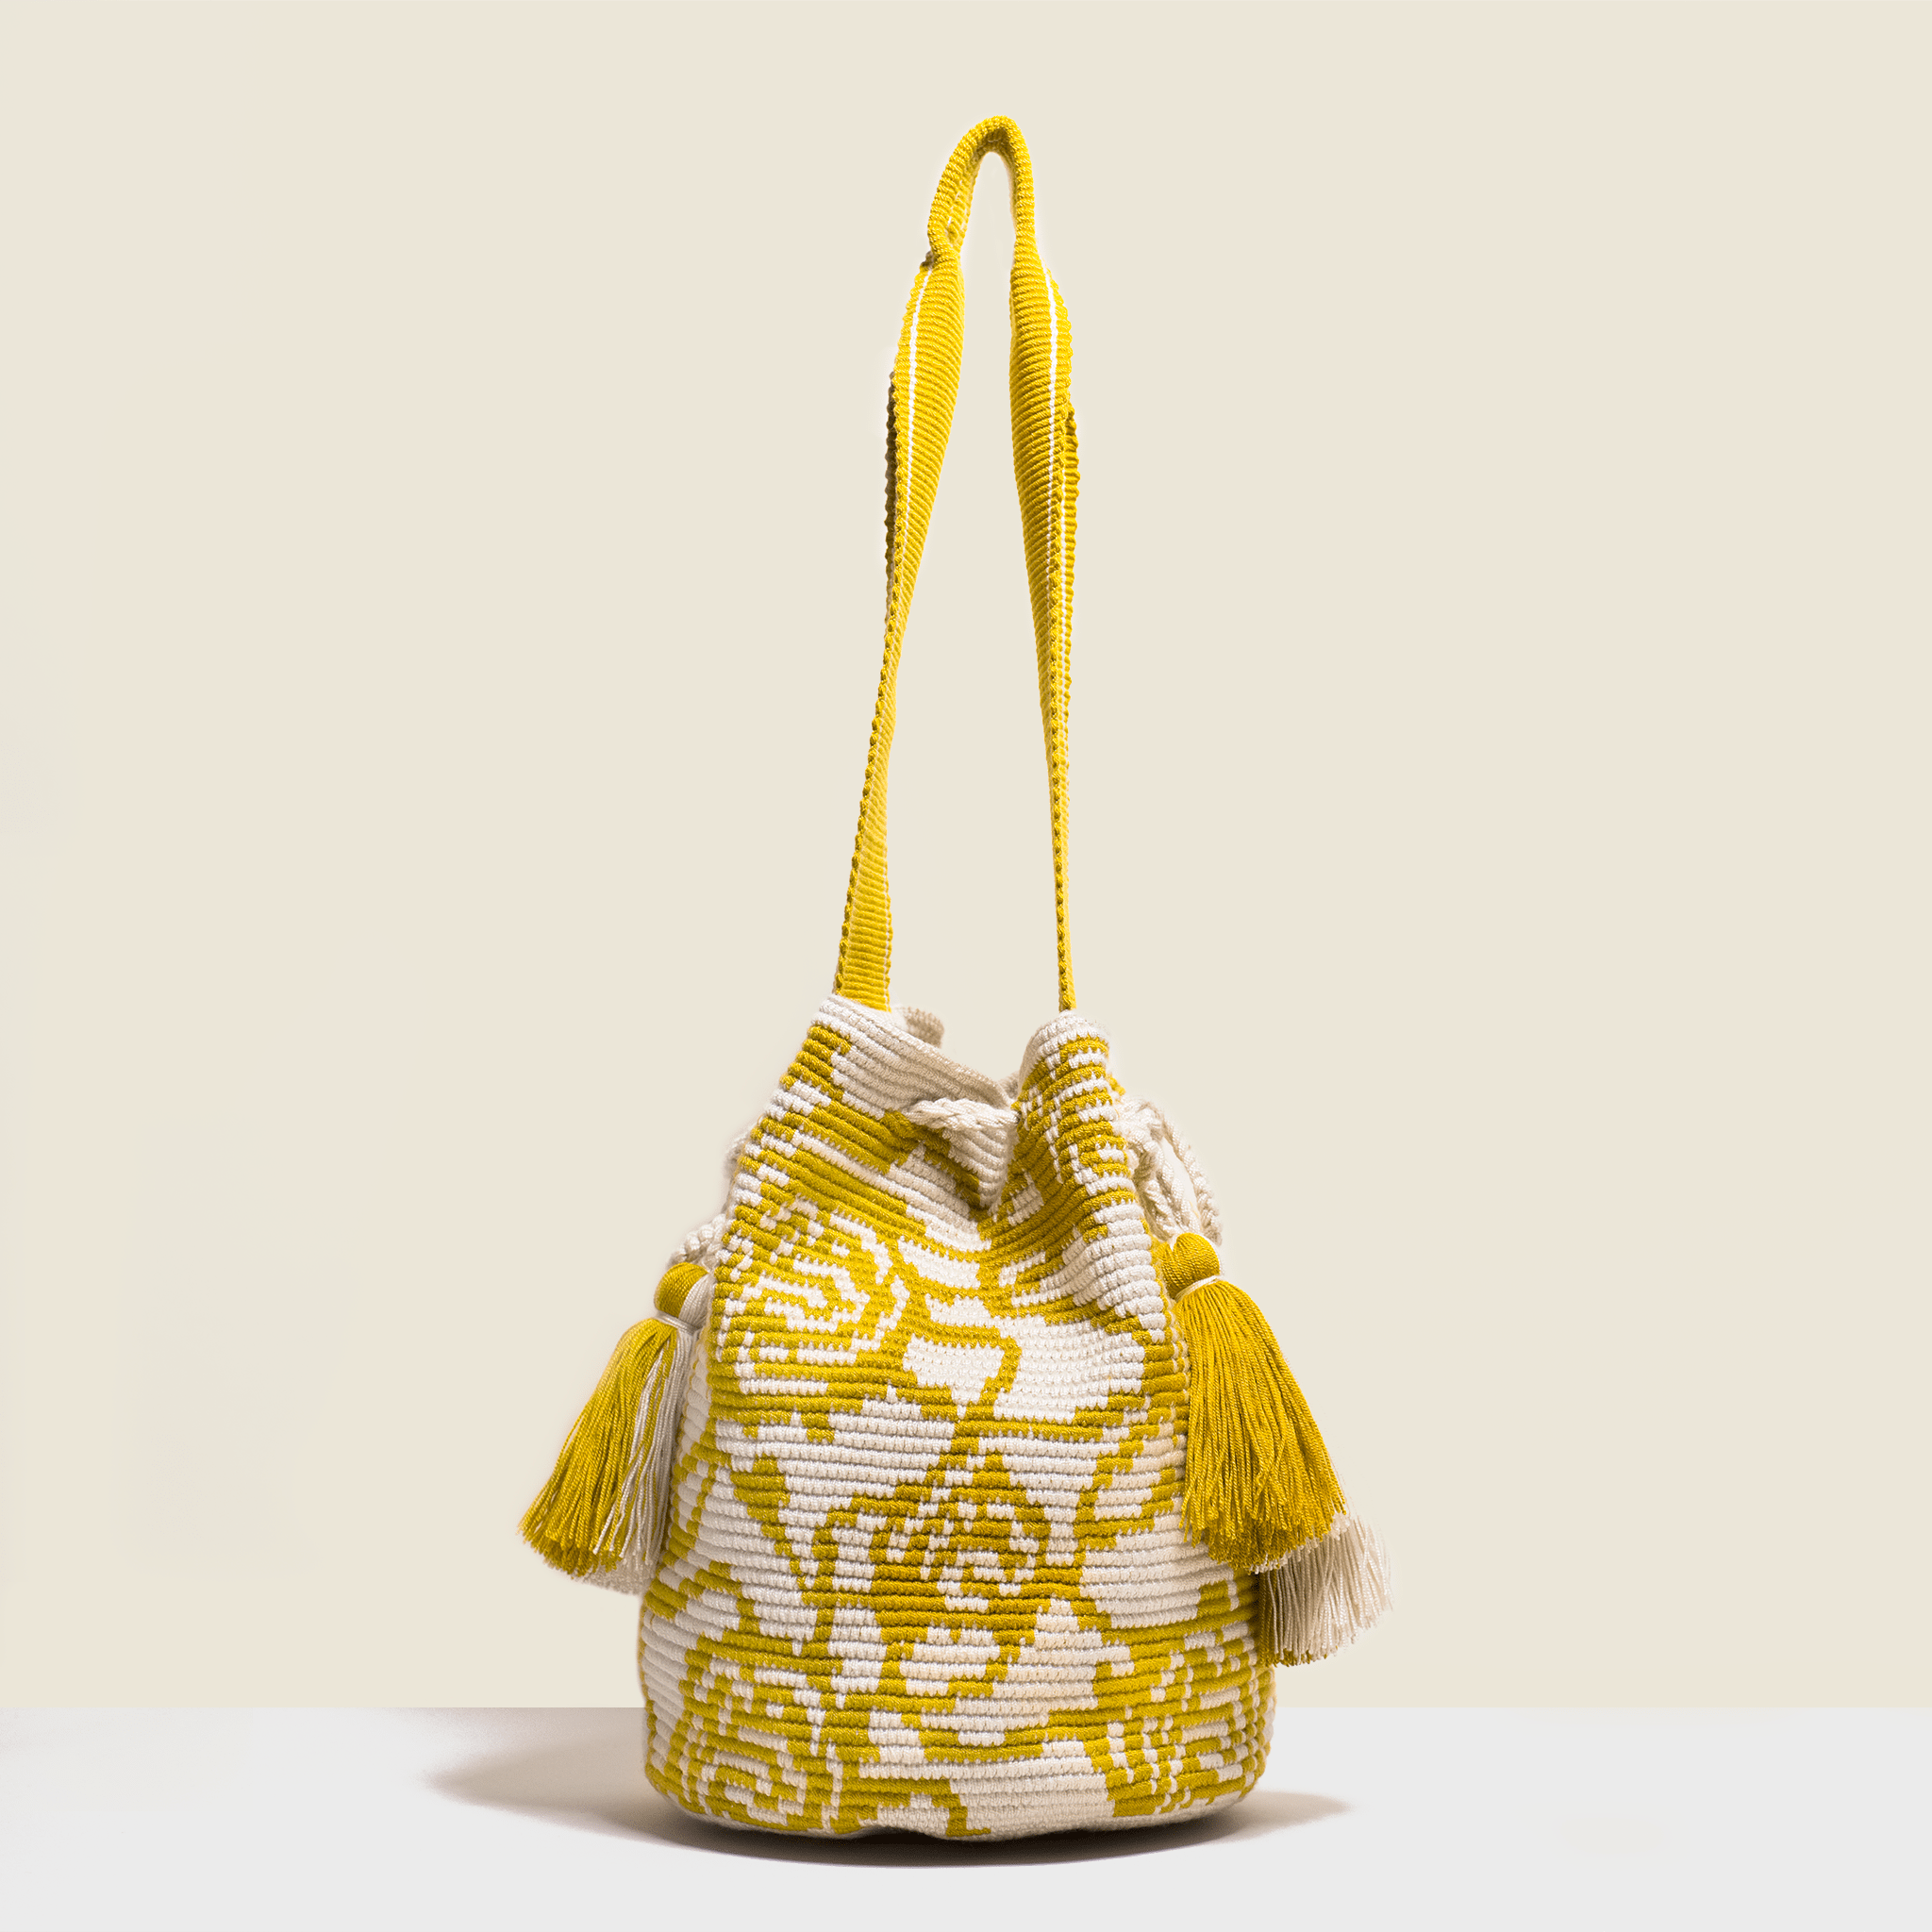 Boho chic bag in cream with details of saffron yellow roses. Cross-body bag. with tassels. 